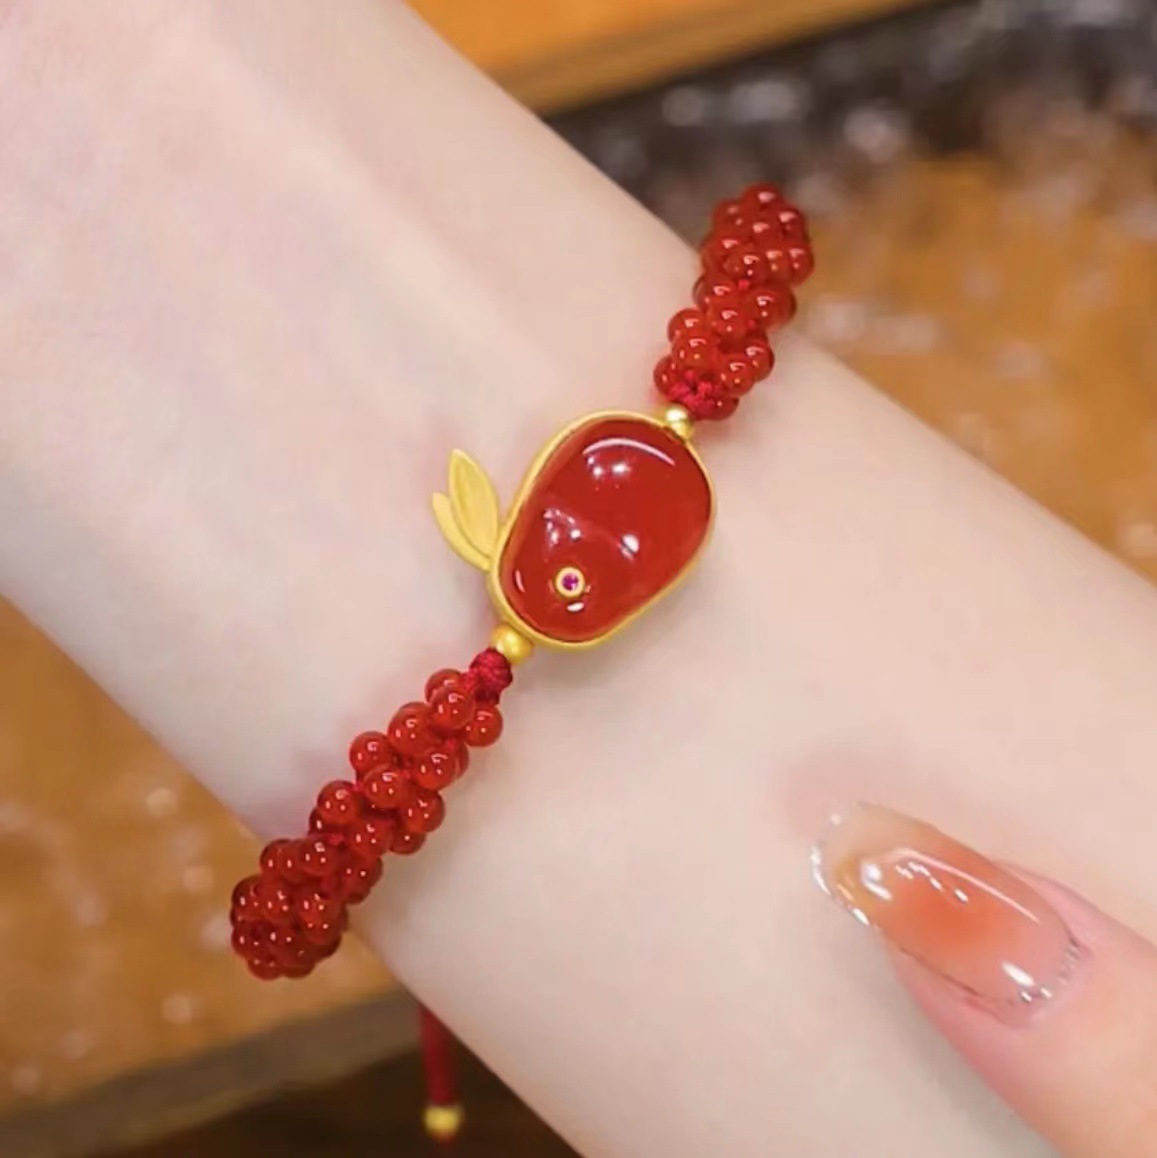 Hot Sale Natural Red Agate Silver Inlay Rabbit Bracelet Agate Corn Straw Women's Small Fresh Bracelet Wholesale